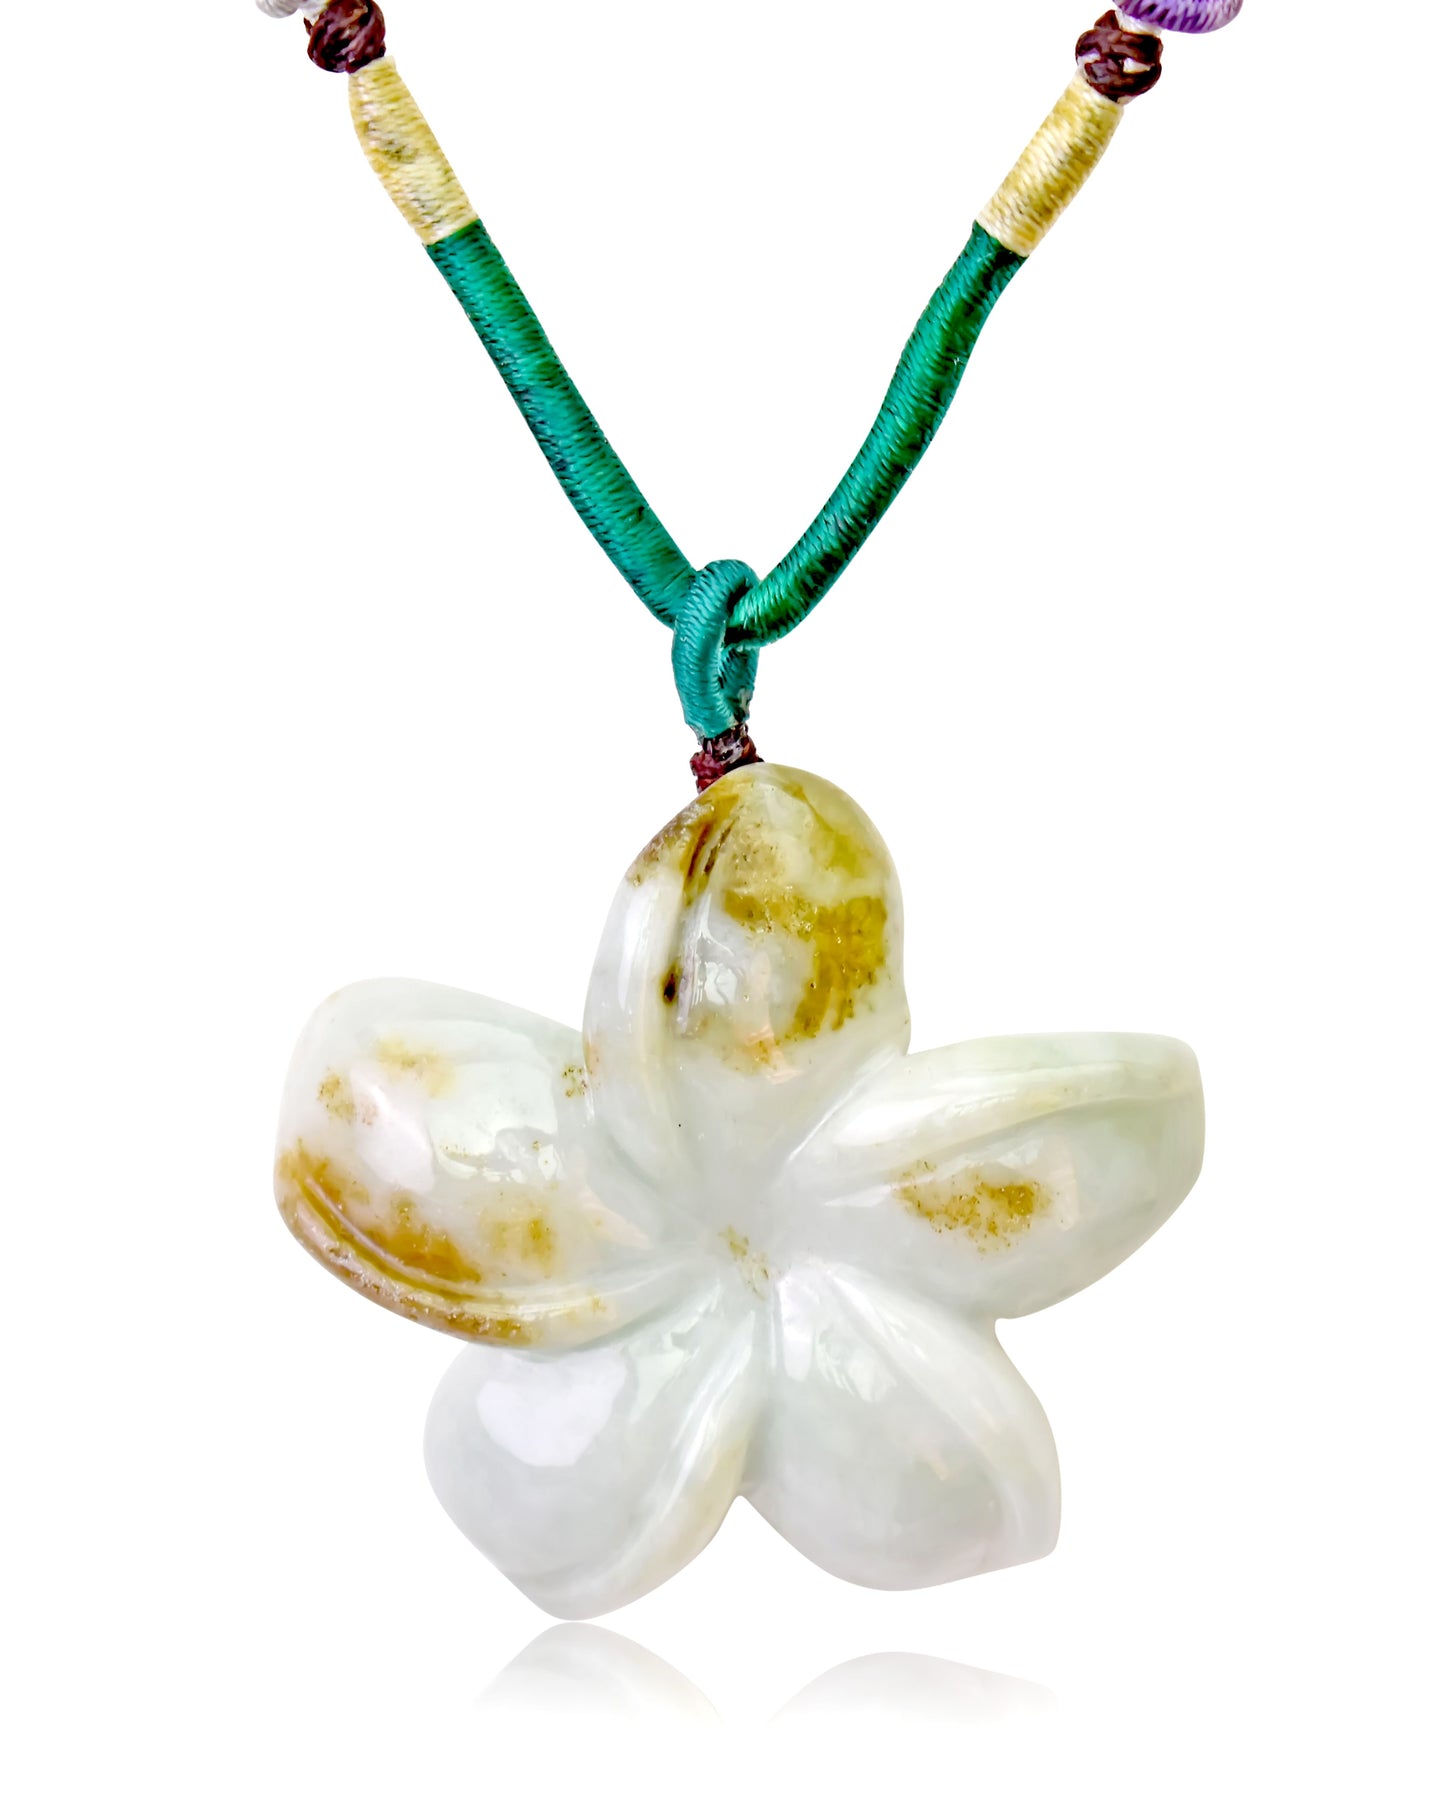 Brighten Up Any Outfit with a Plumeria Flower Jade Necklace